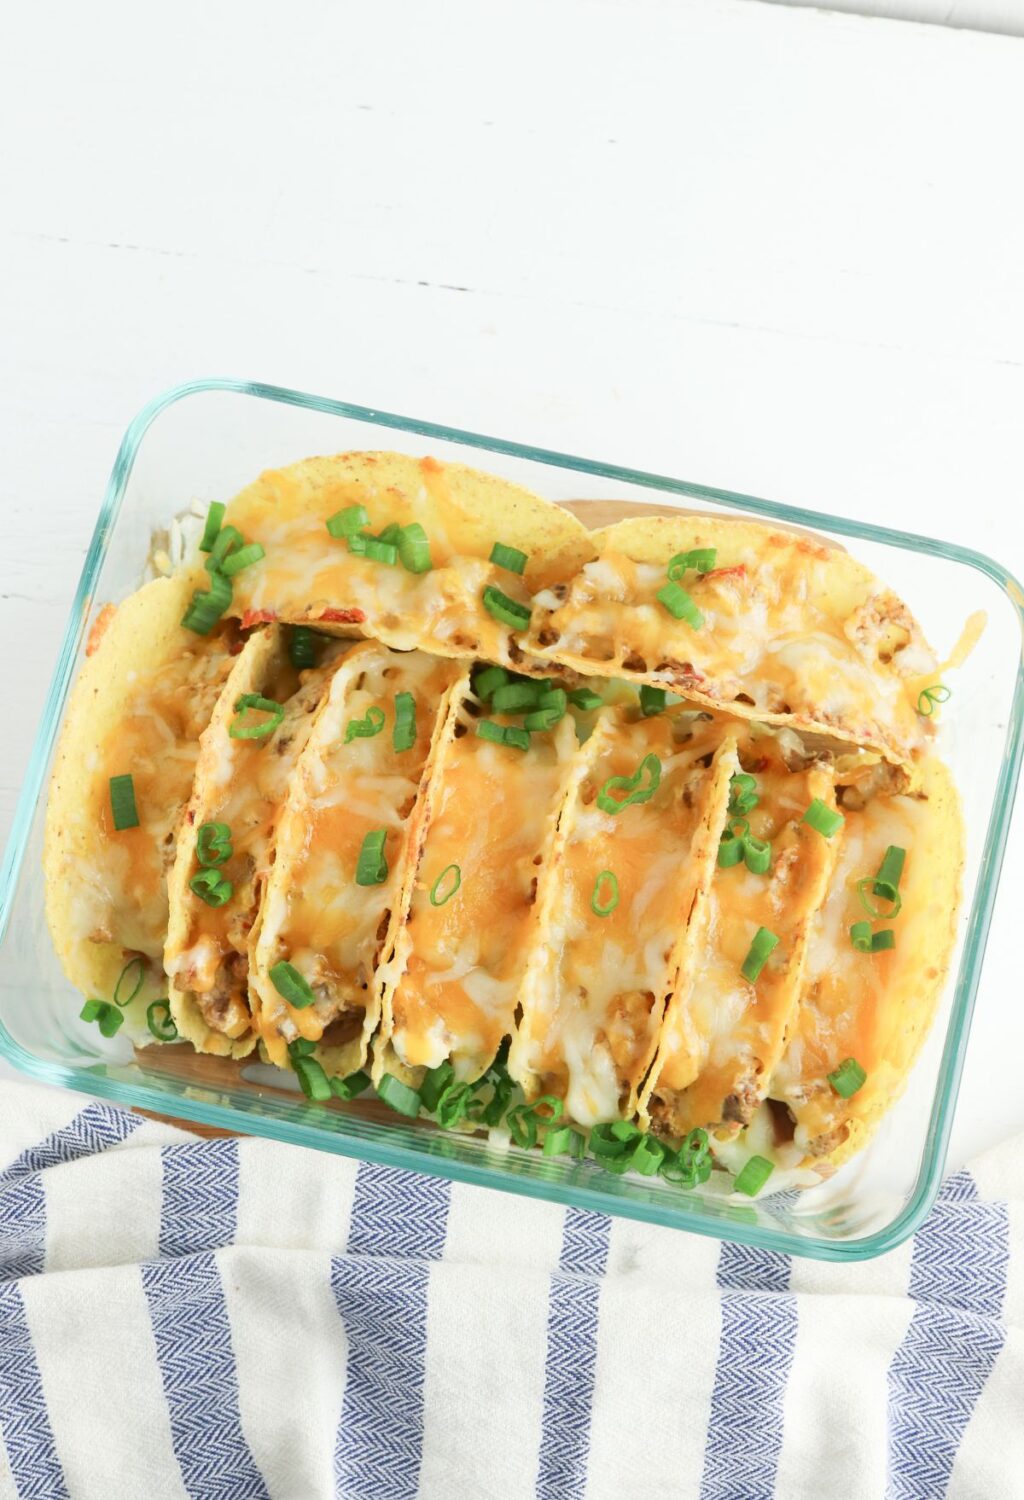 Chicken tacos in a glass baking dish.